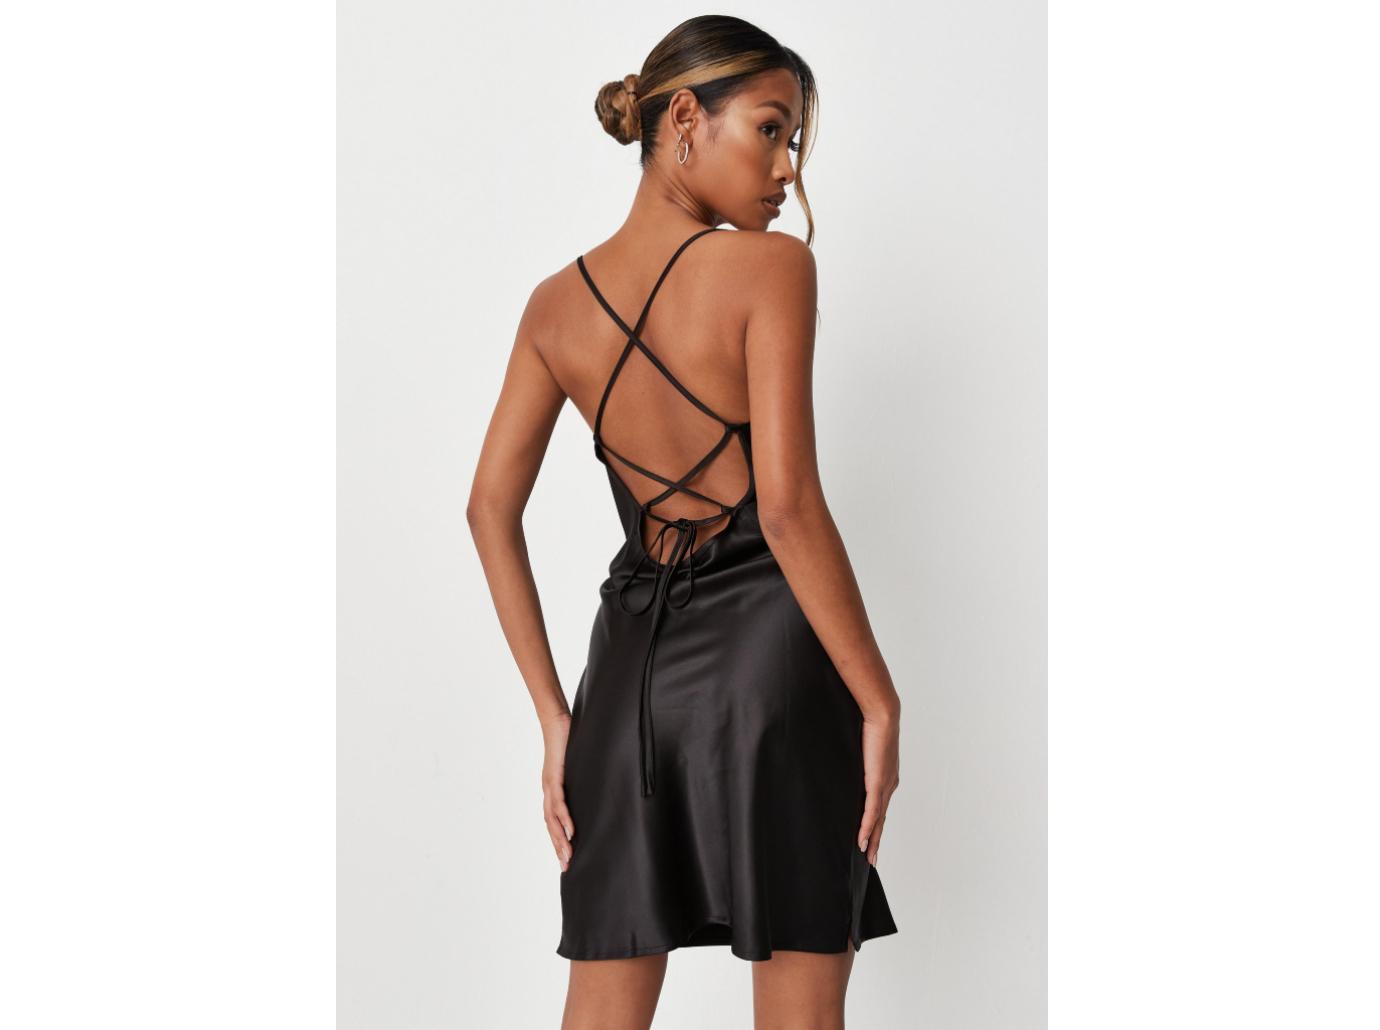 Missguided Silky Cami Dress Black, $40, Missguided